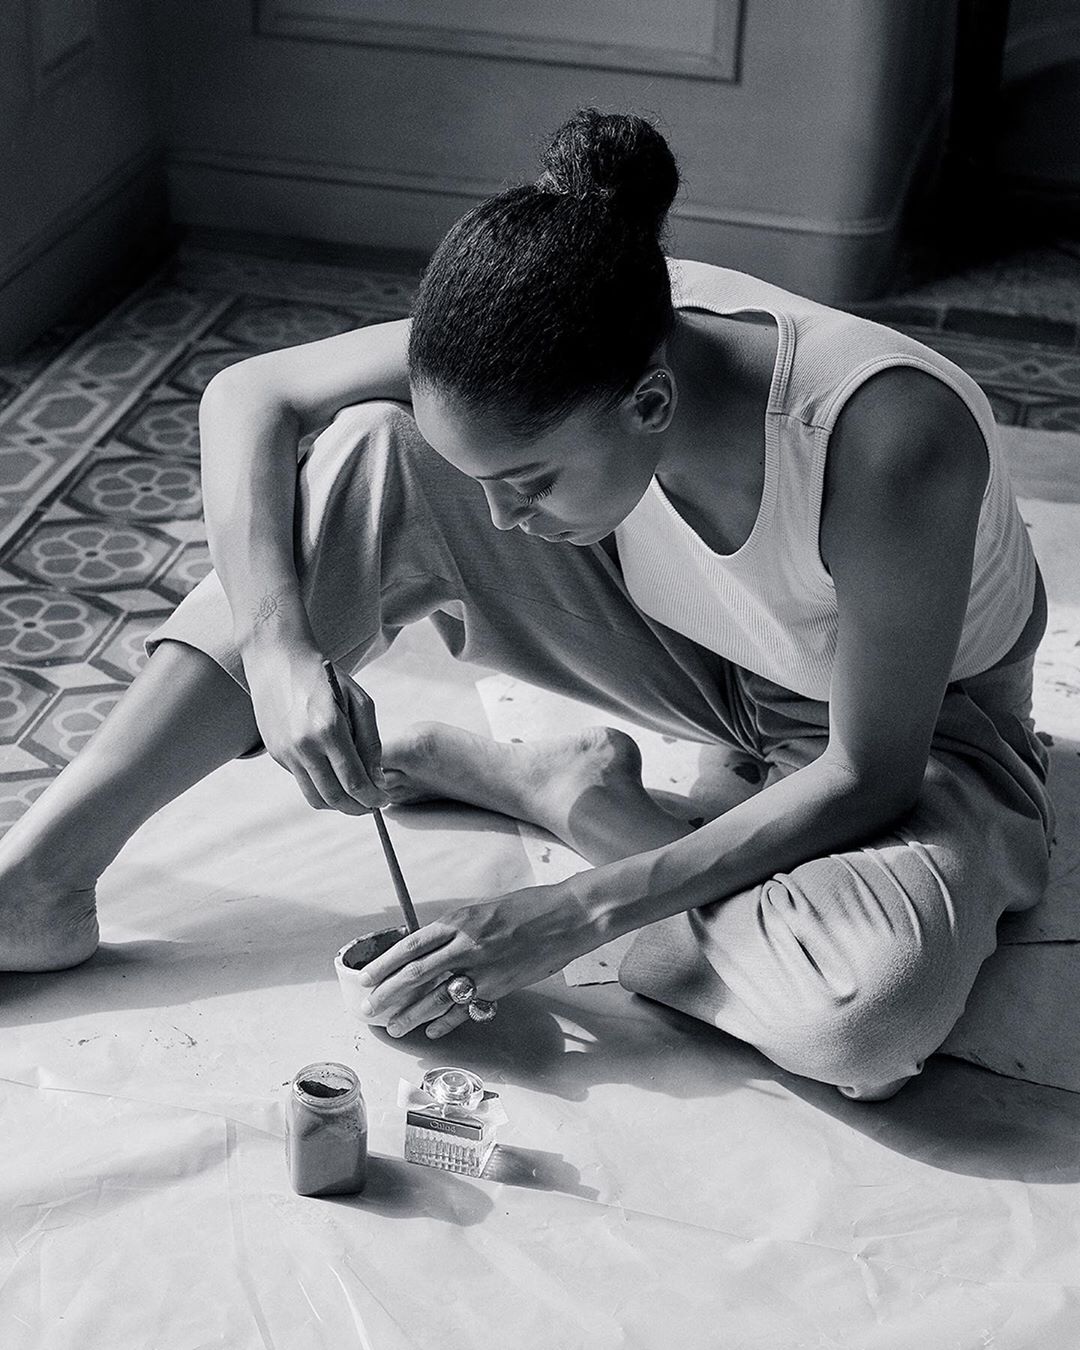 Chloé - Artist Kesewa Aboah (@Kesewa.Aboah) finds new expression alongside our iconic fragrance

Discover this Eau de Parfum and others in boutiques and on chloe.com

#CHLOE
#IamCHLOE